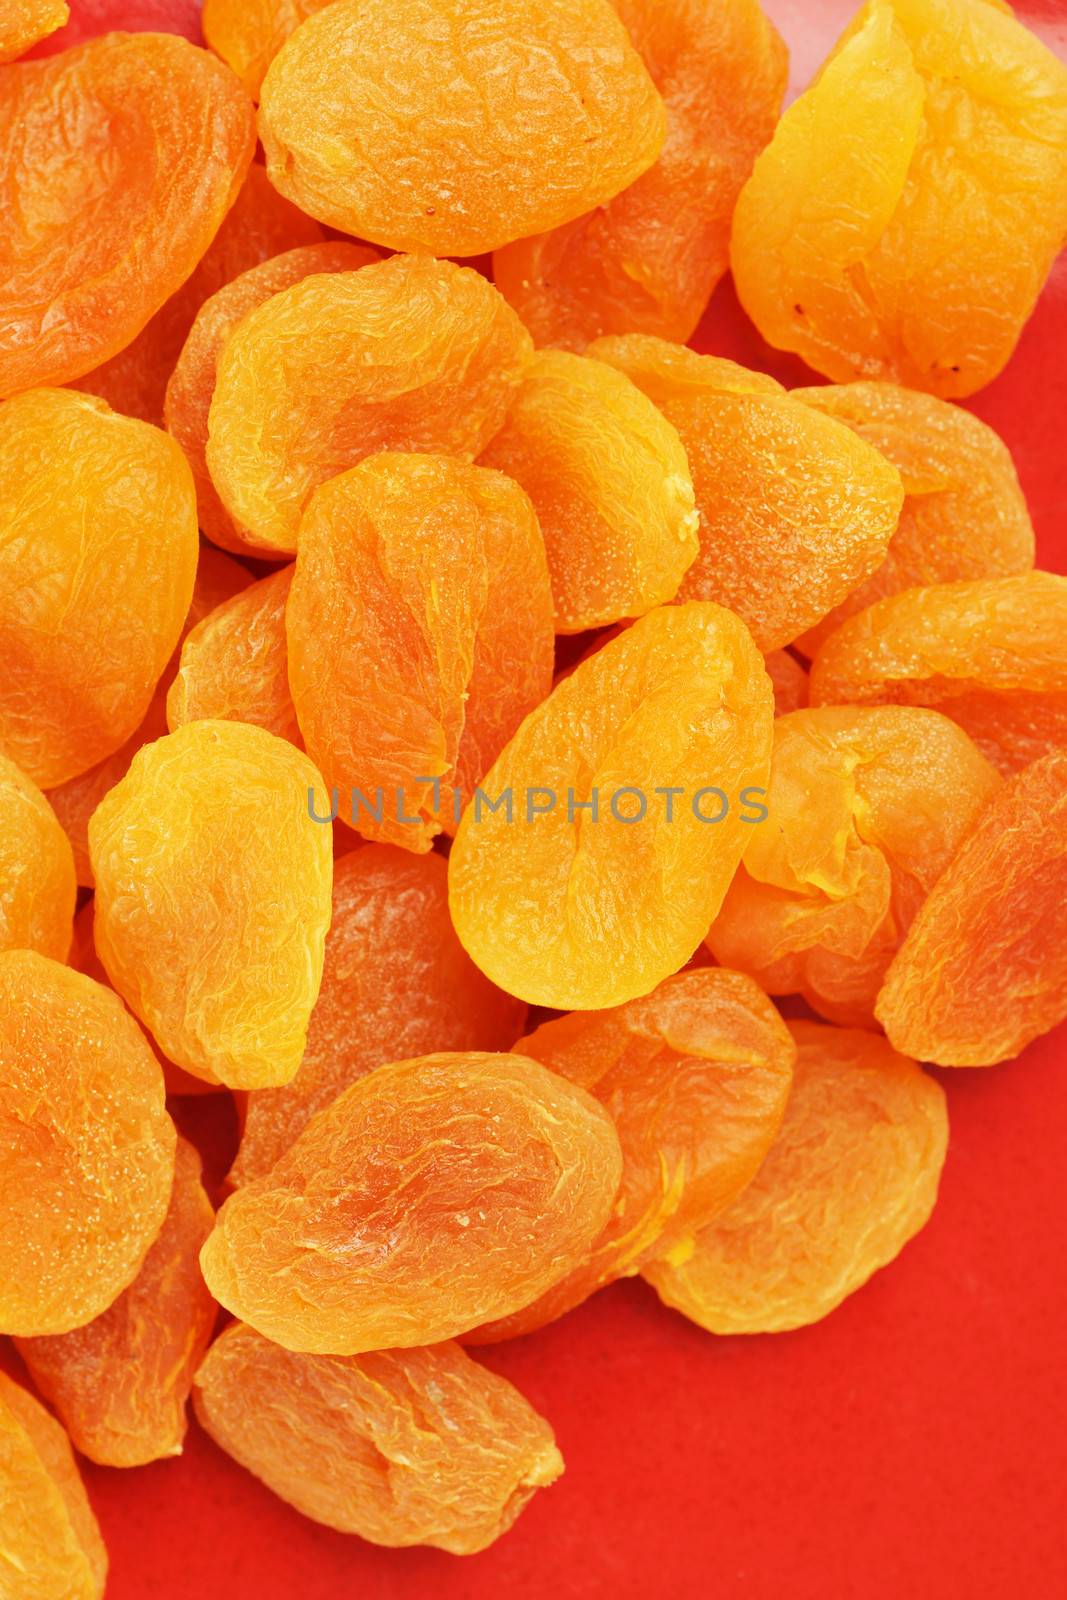 Heap of sweet dried apricot fruits on red plate, colorful food background